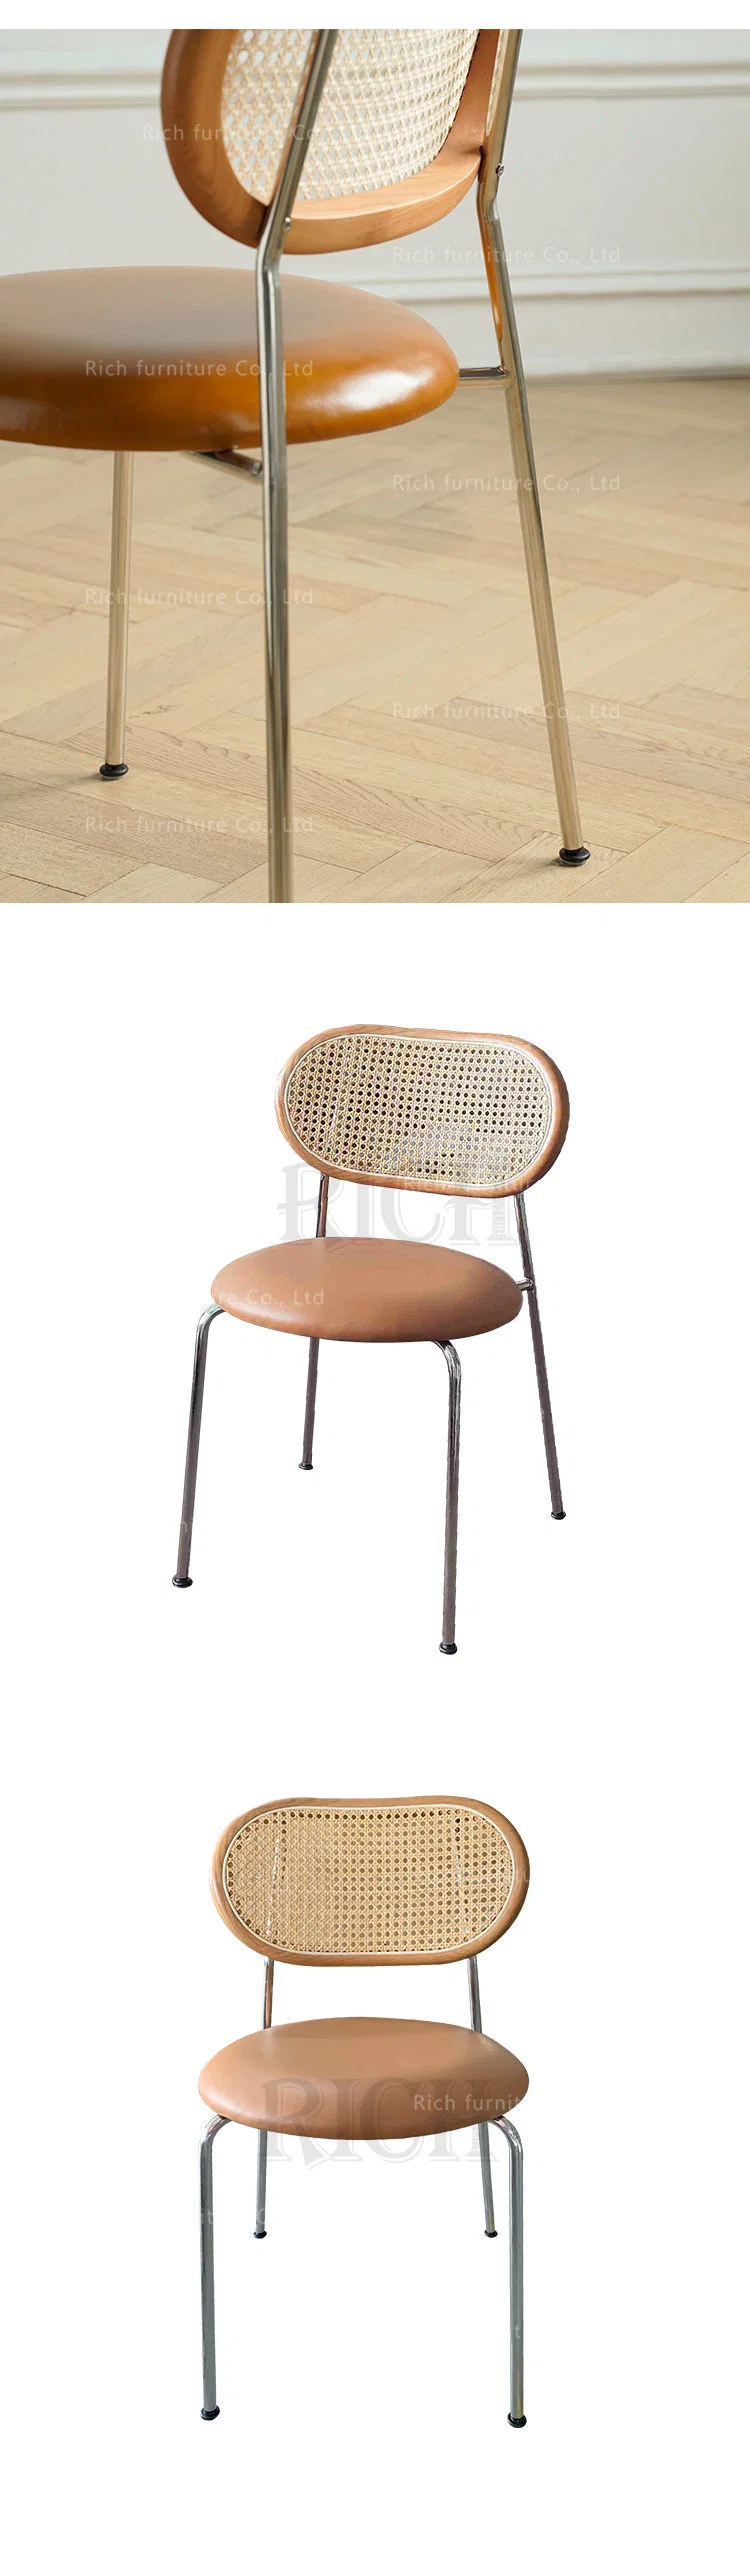 Nordic Metal Frame Kitchen Dining Chairs Modern Restaurant Cafe Chair Wicker Rattan Cane Back Dining Chair